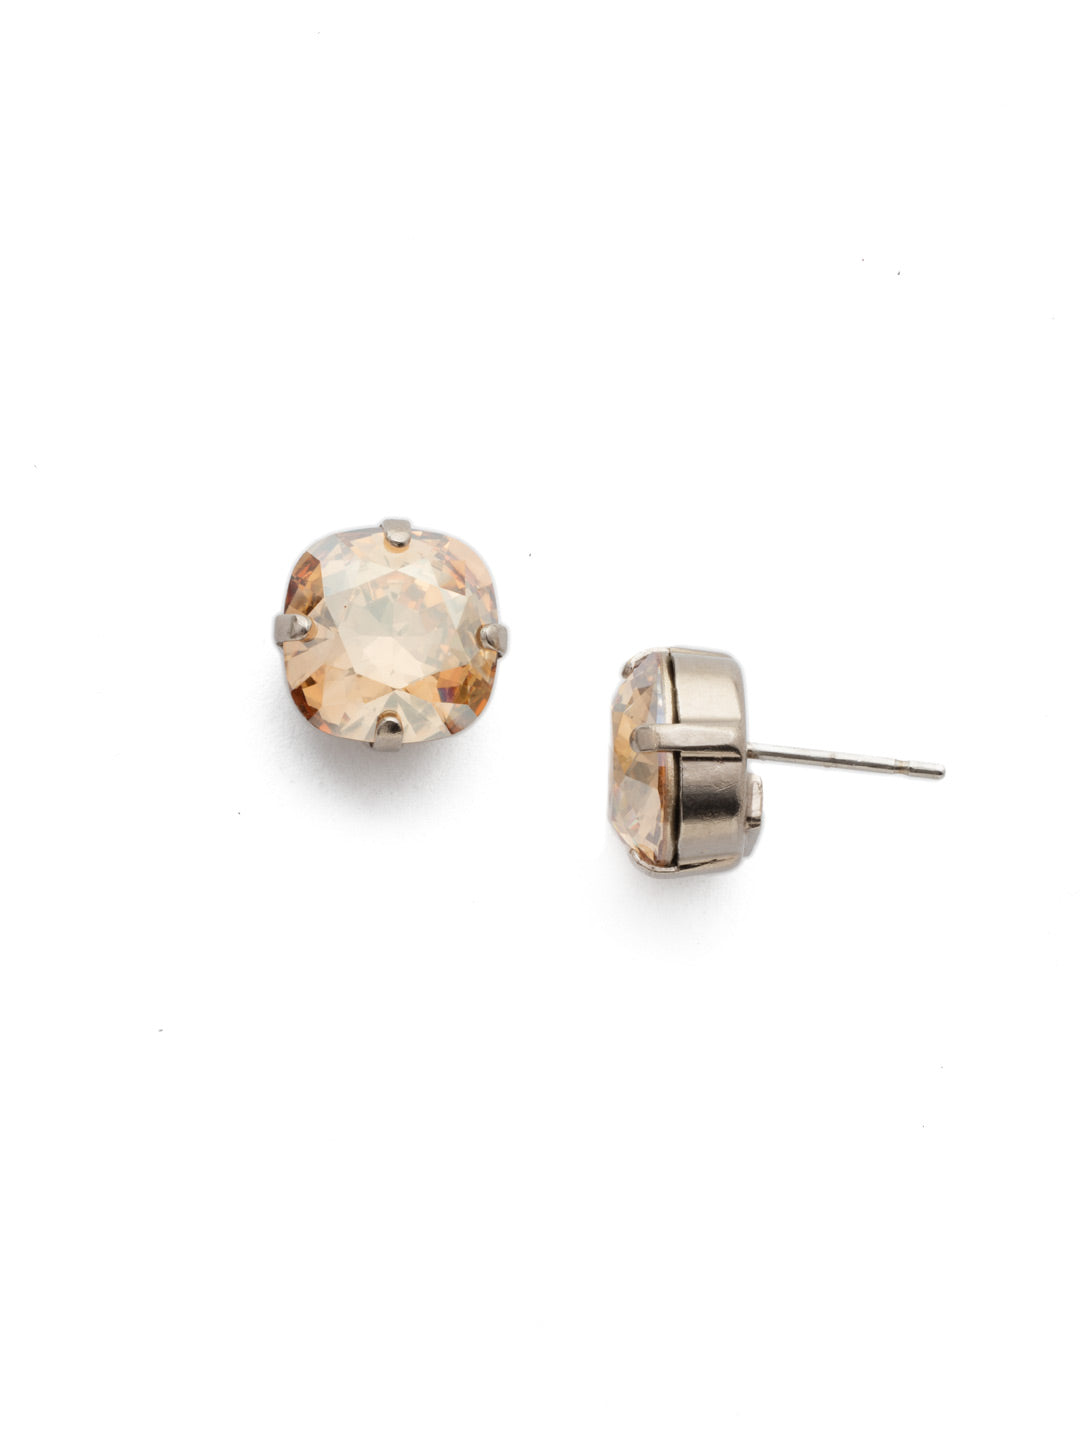 Halcyon Stud Earrings - EDH25ASDCH - A beautiful, luminous cushion-cut crystal in a classic four-pronged setting that's ideal for everyday wear. From Sorrelli's Dark Champagne collection in our Antique Silver-tone finish.